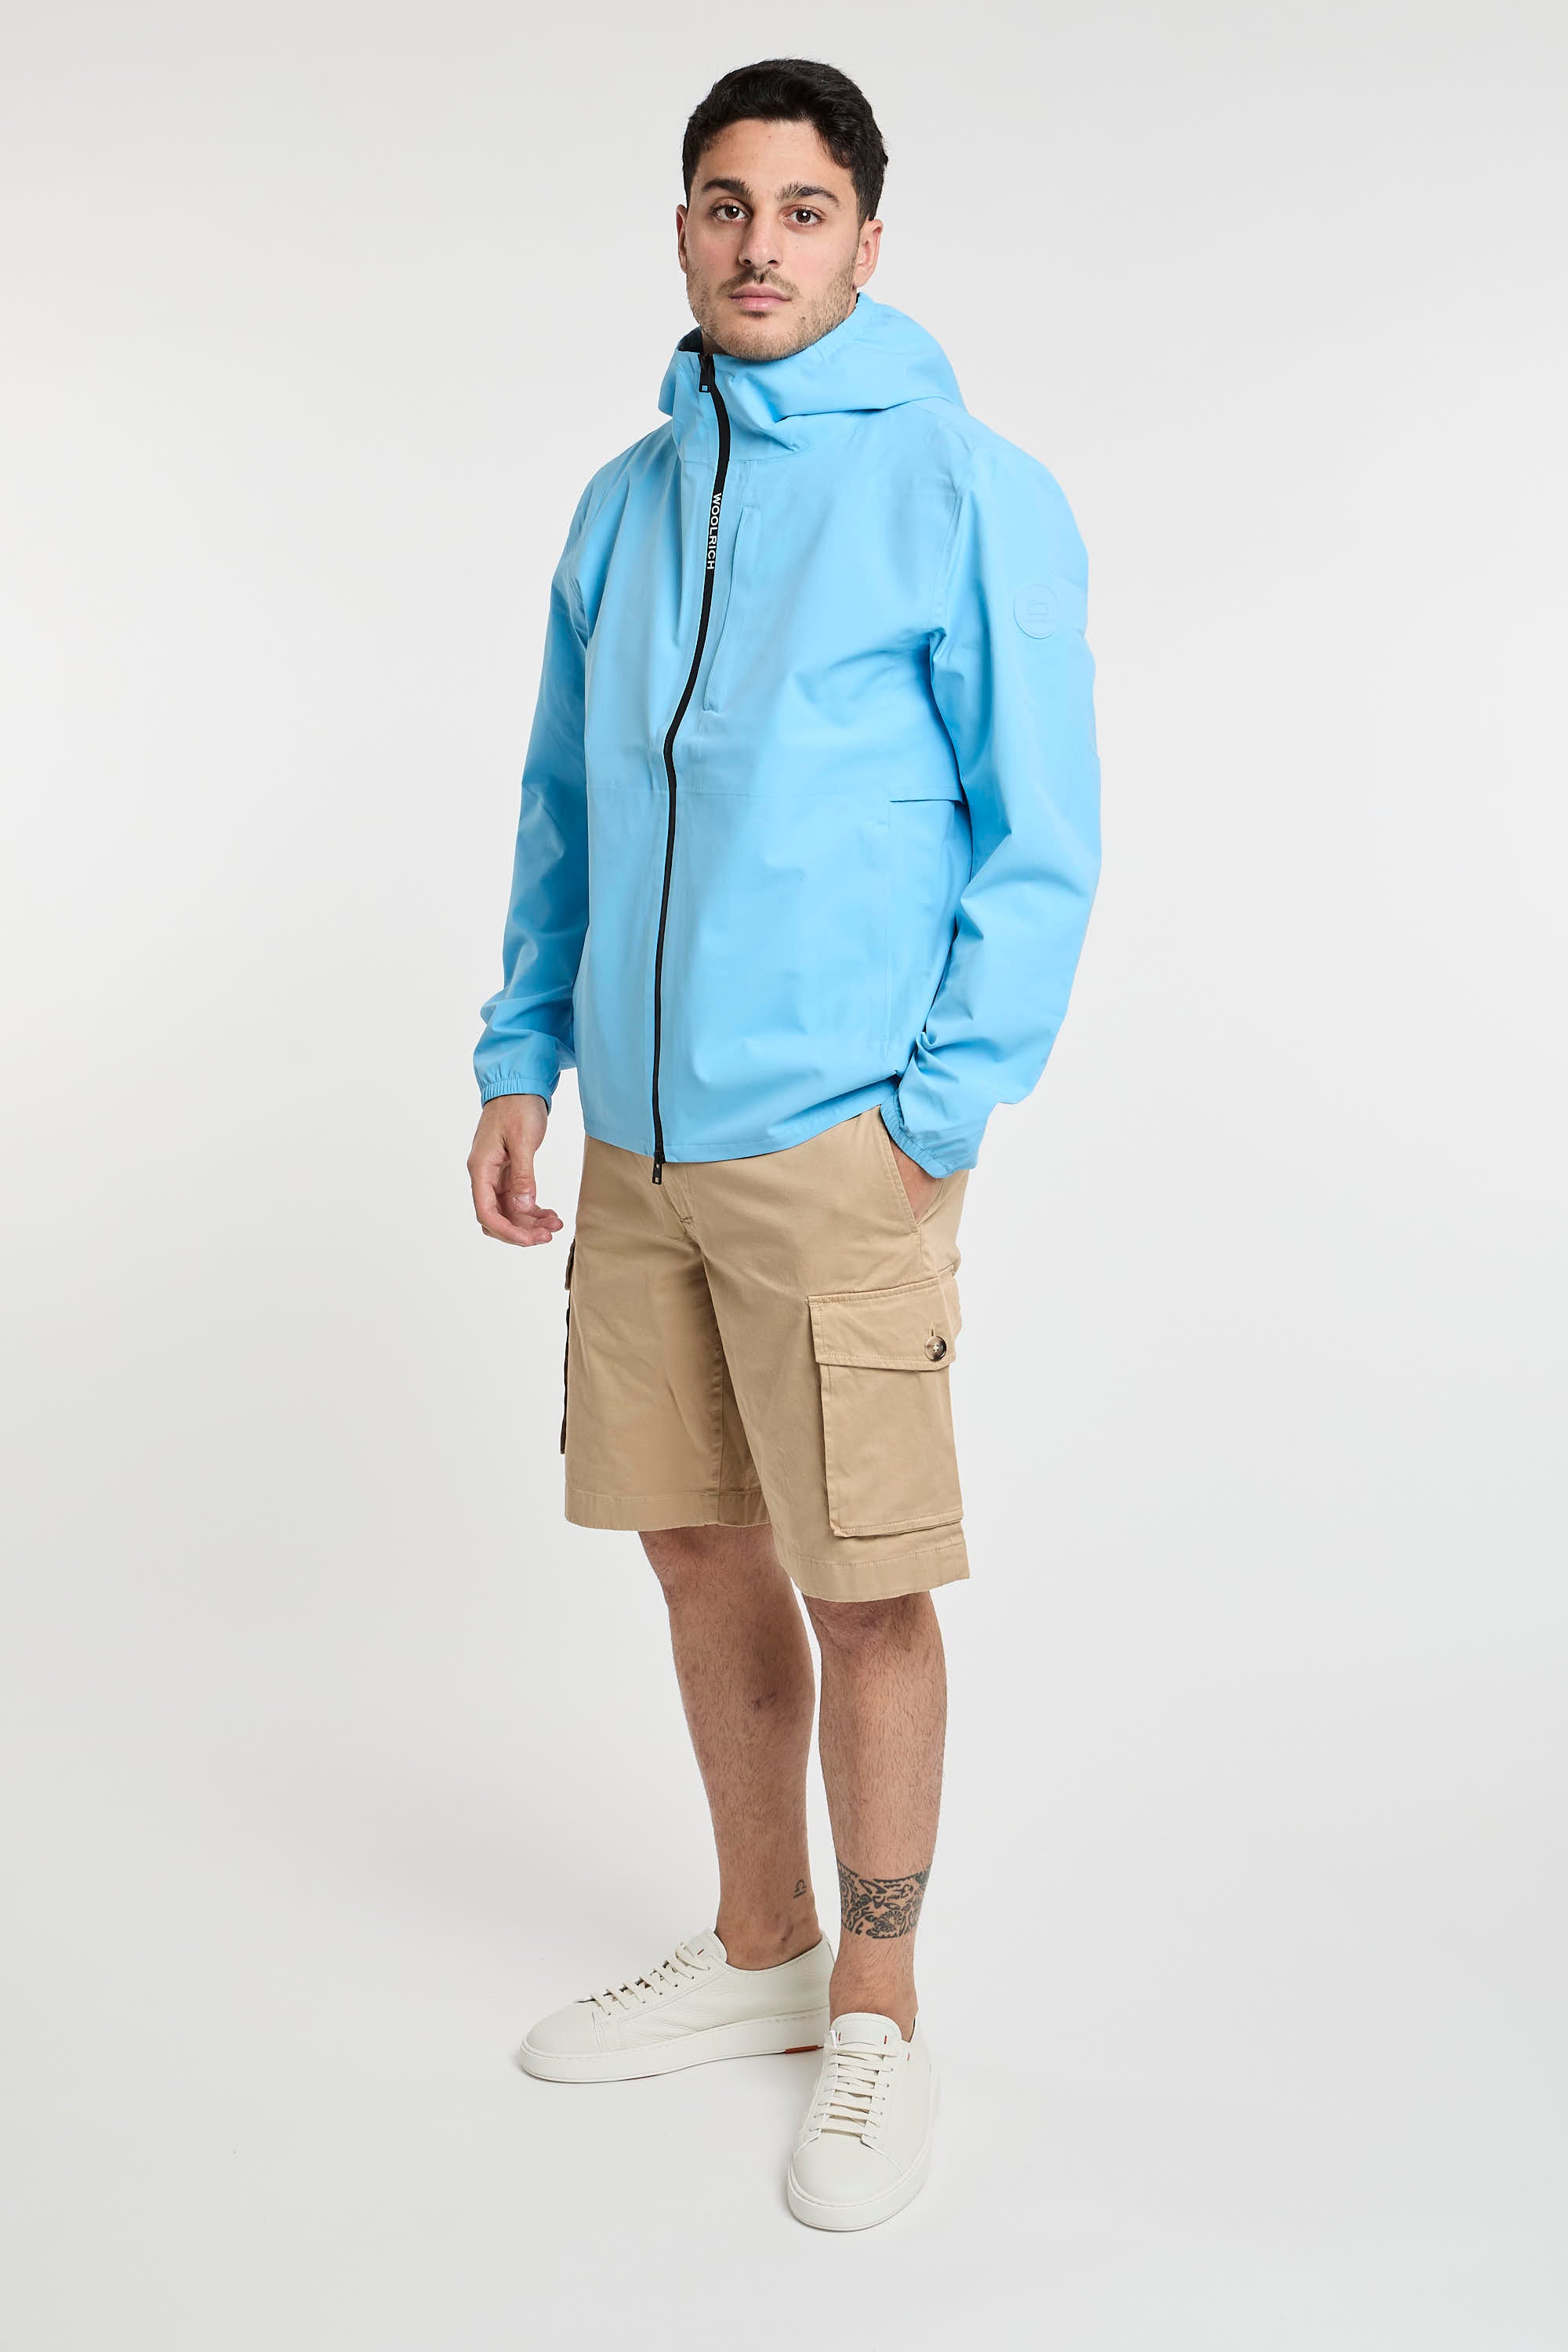 Woolrich Waterproof Polyester Pacific Jacket with Hood in Blue-7